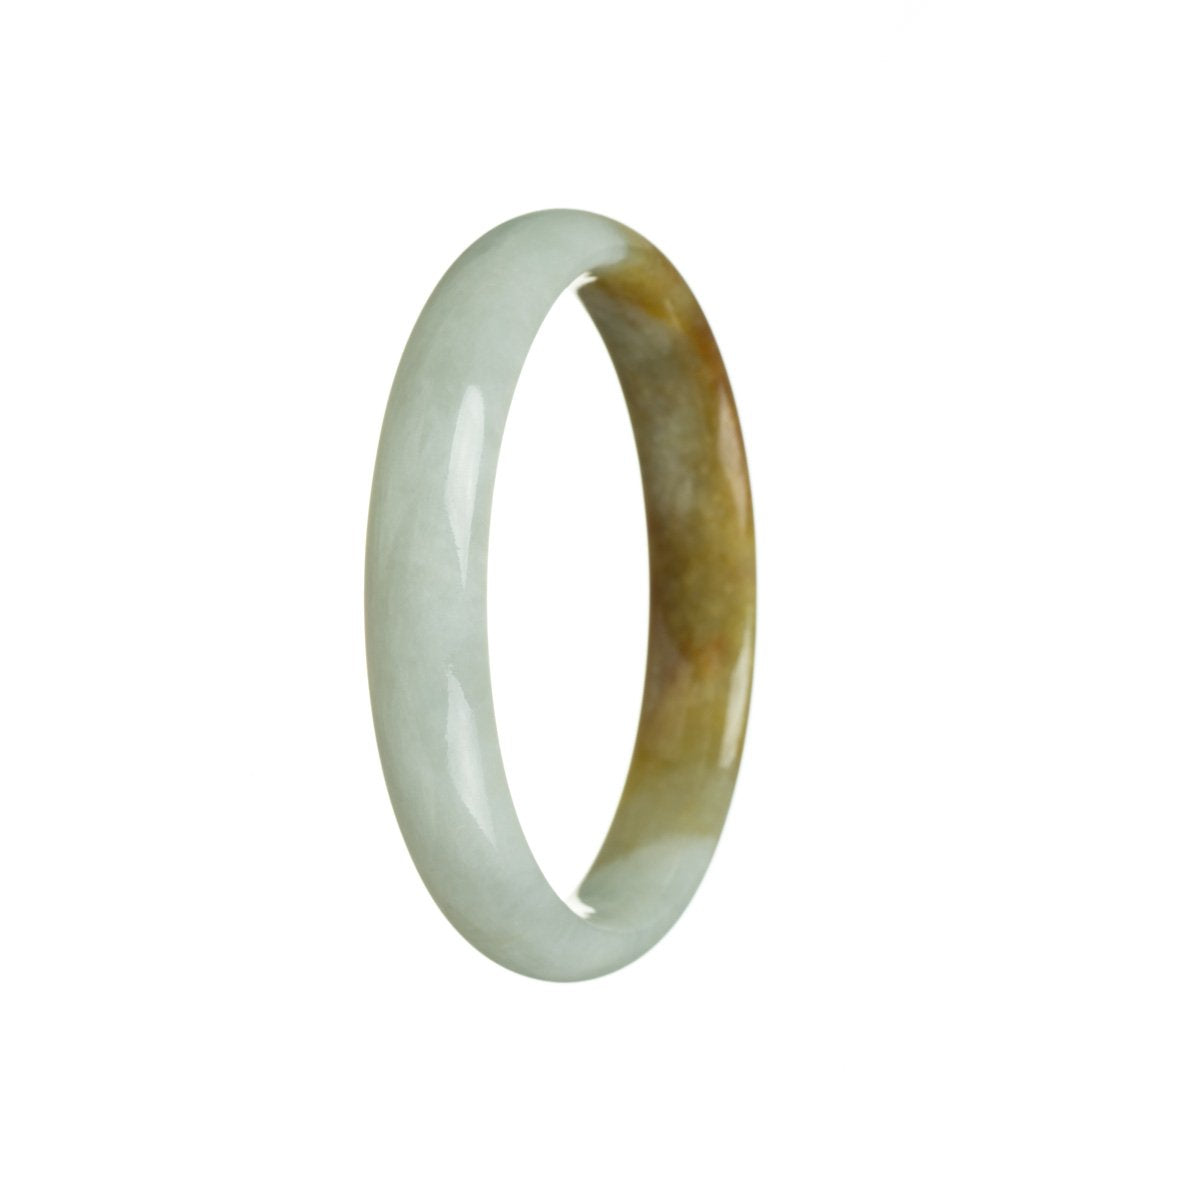 A half moon shaped bangle made of genuine pale green with brown Burma Jade, measuring 57mm in size, from the brand MAYS.